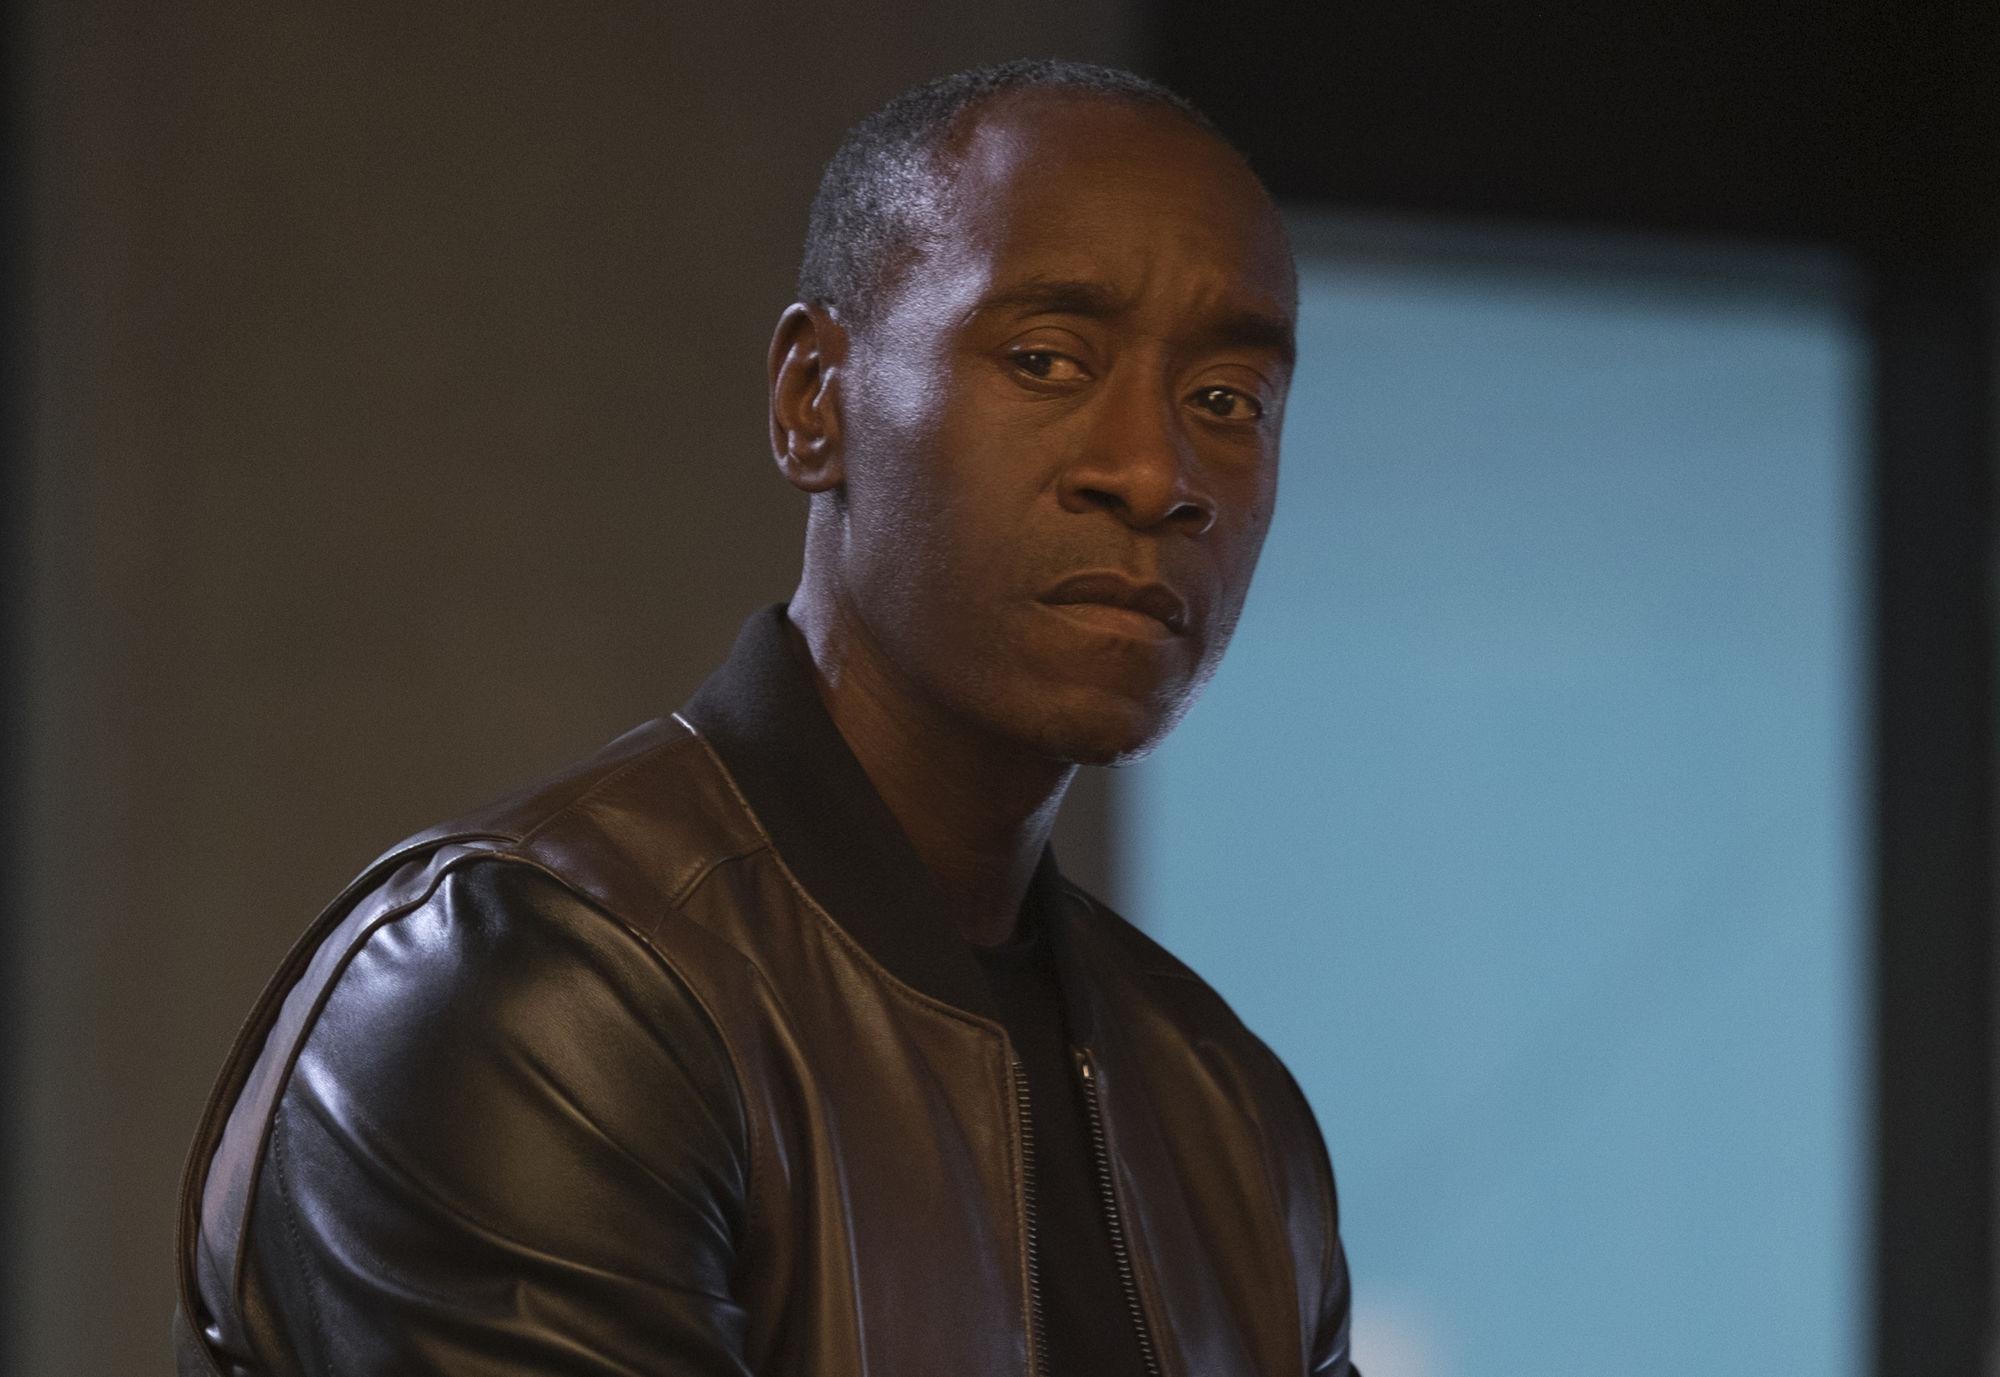 Cool Don Cheadle wallpapers, Striking visuals, Photo collection, Cool wallpapers, 2000x1380 HD Desktop